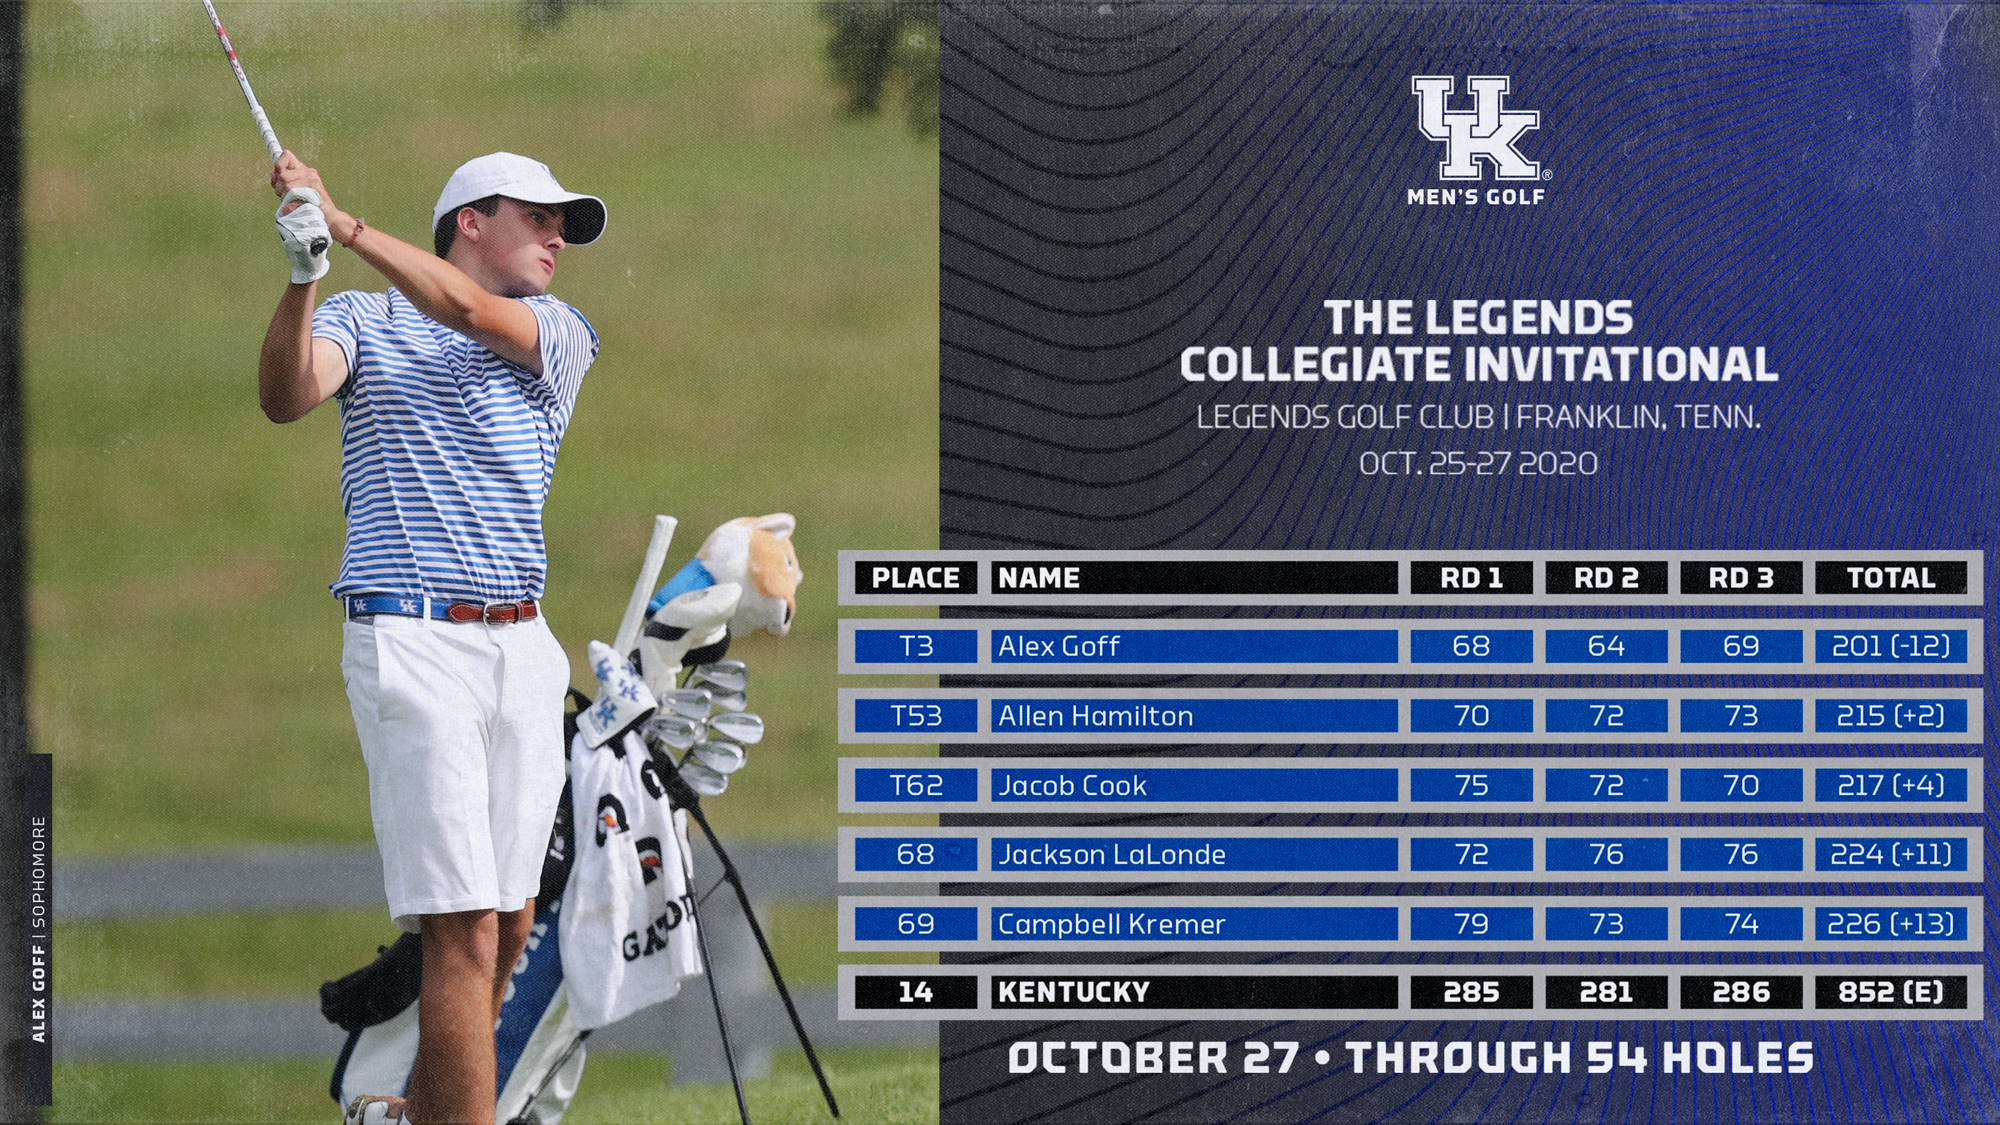 Goff Finishes in Top Three to Lead Wildcats at Legends